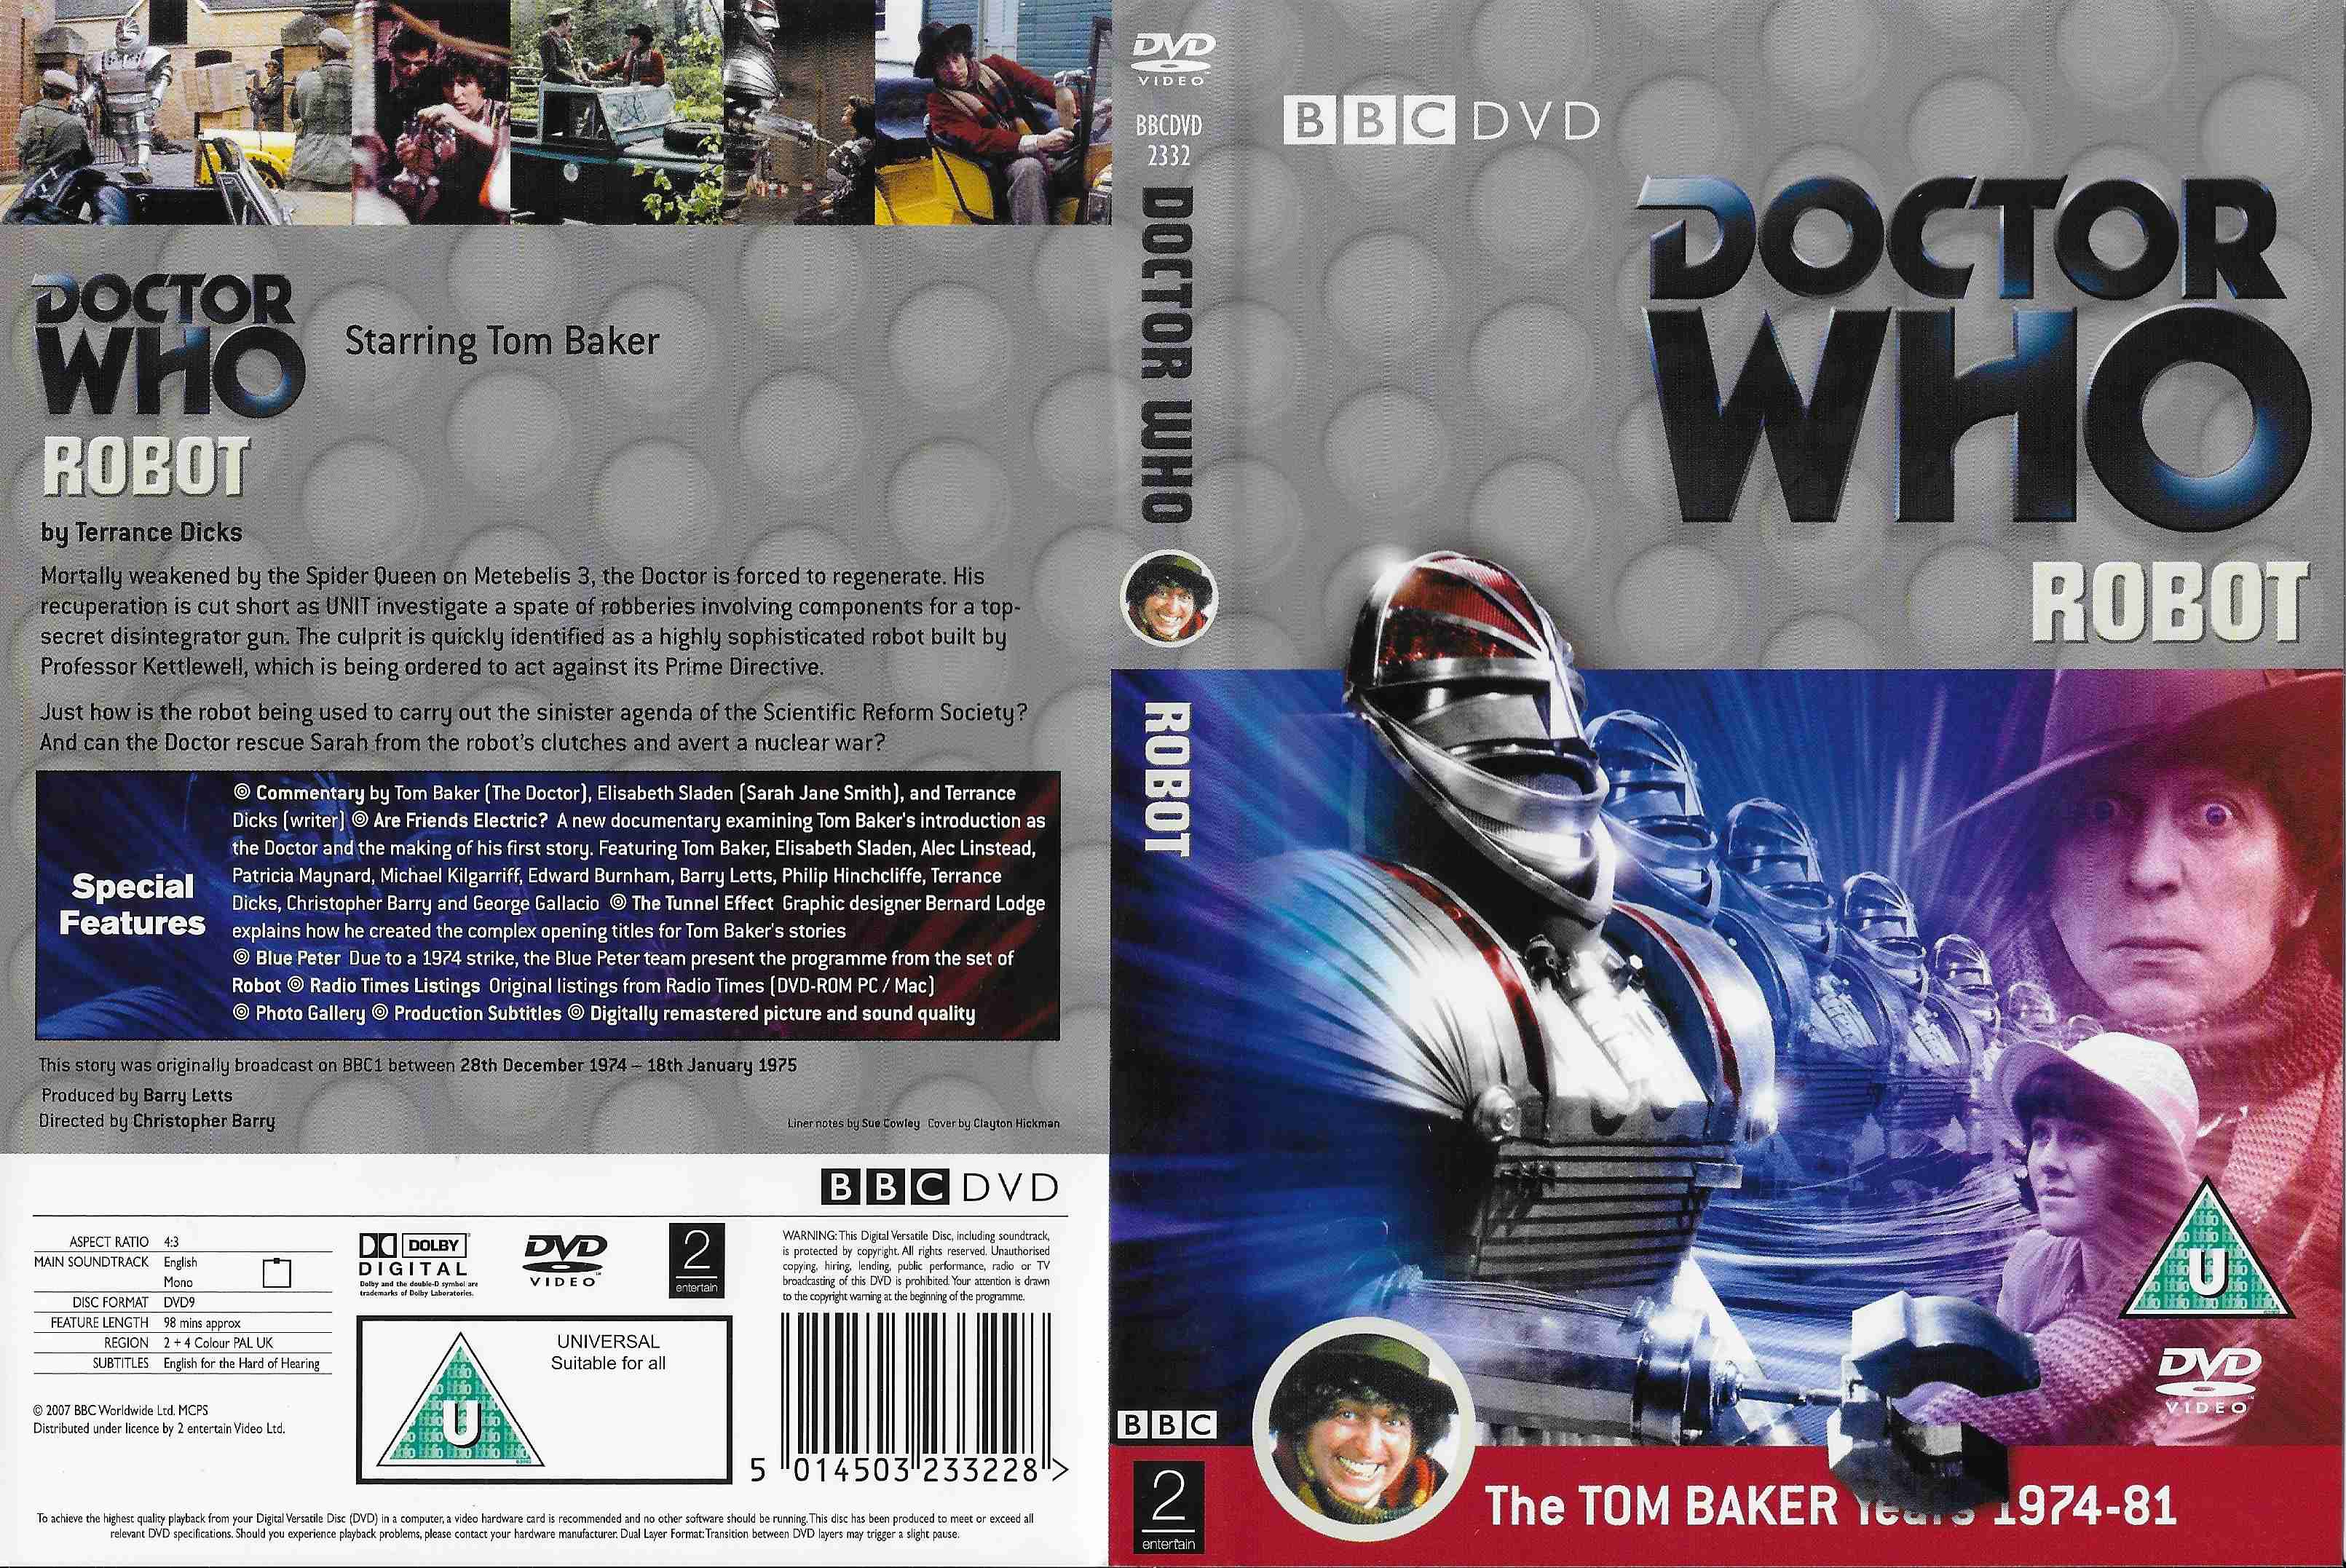 Picture of BBCDVD 2332 Doctor Who - Robot by artist Terrance Dicks from the BBC records and Tapes library